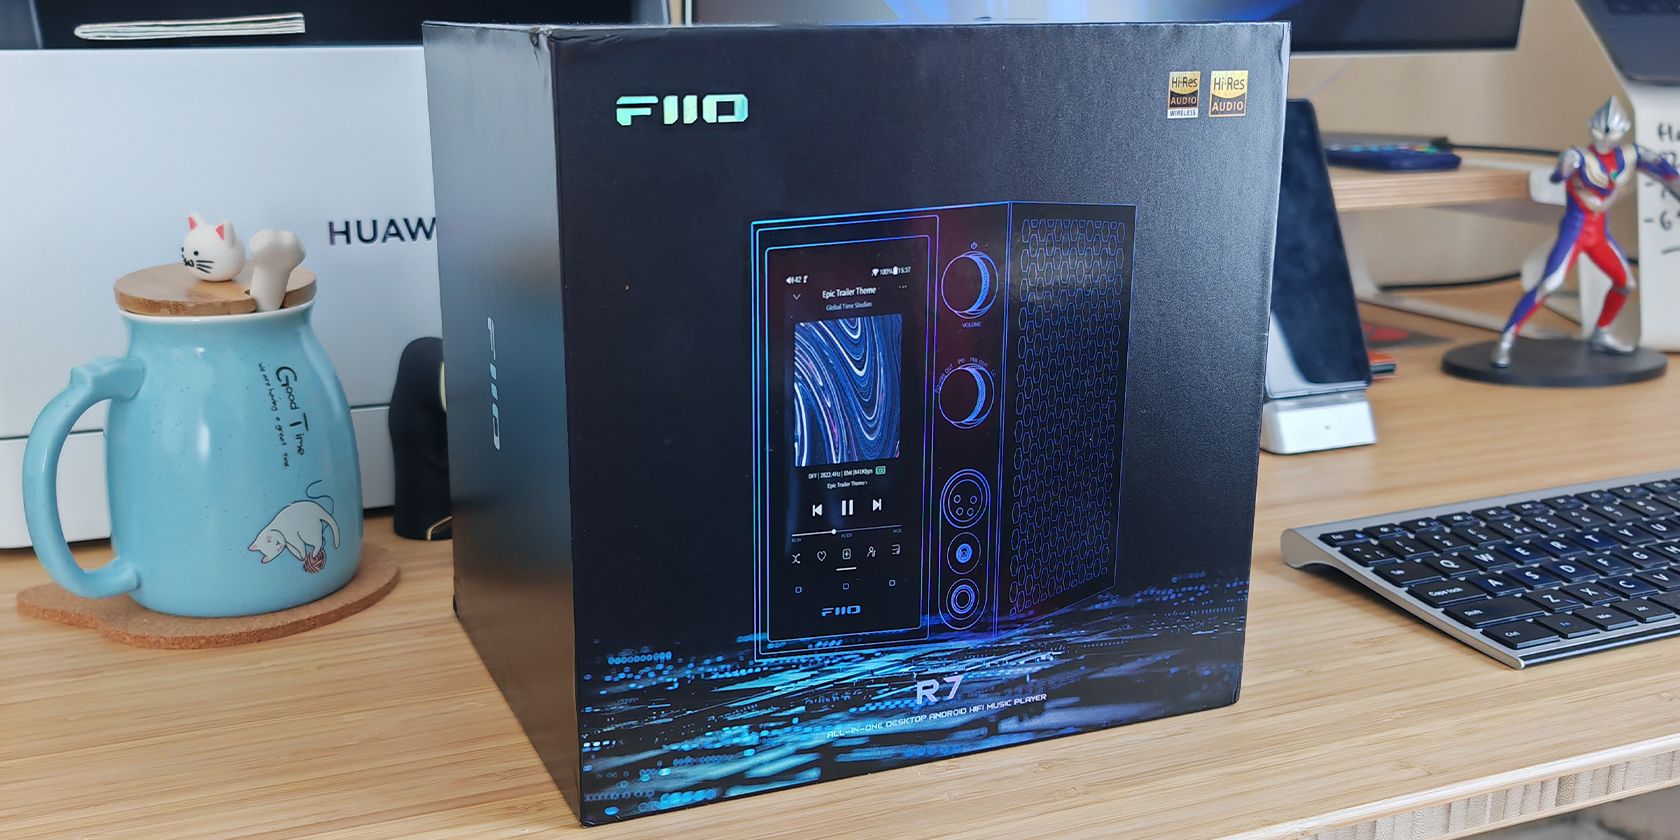 The FiiO R7 is a unique hi-res desktop system for upgrading your home  office and headphone audio